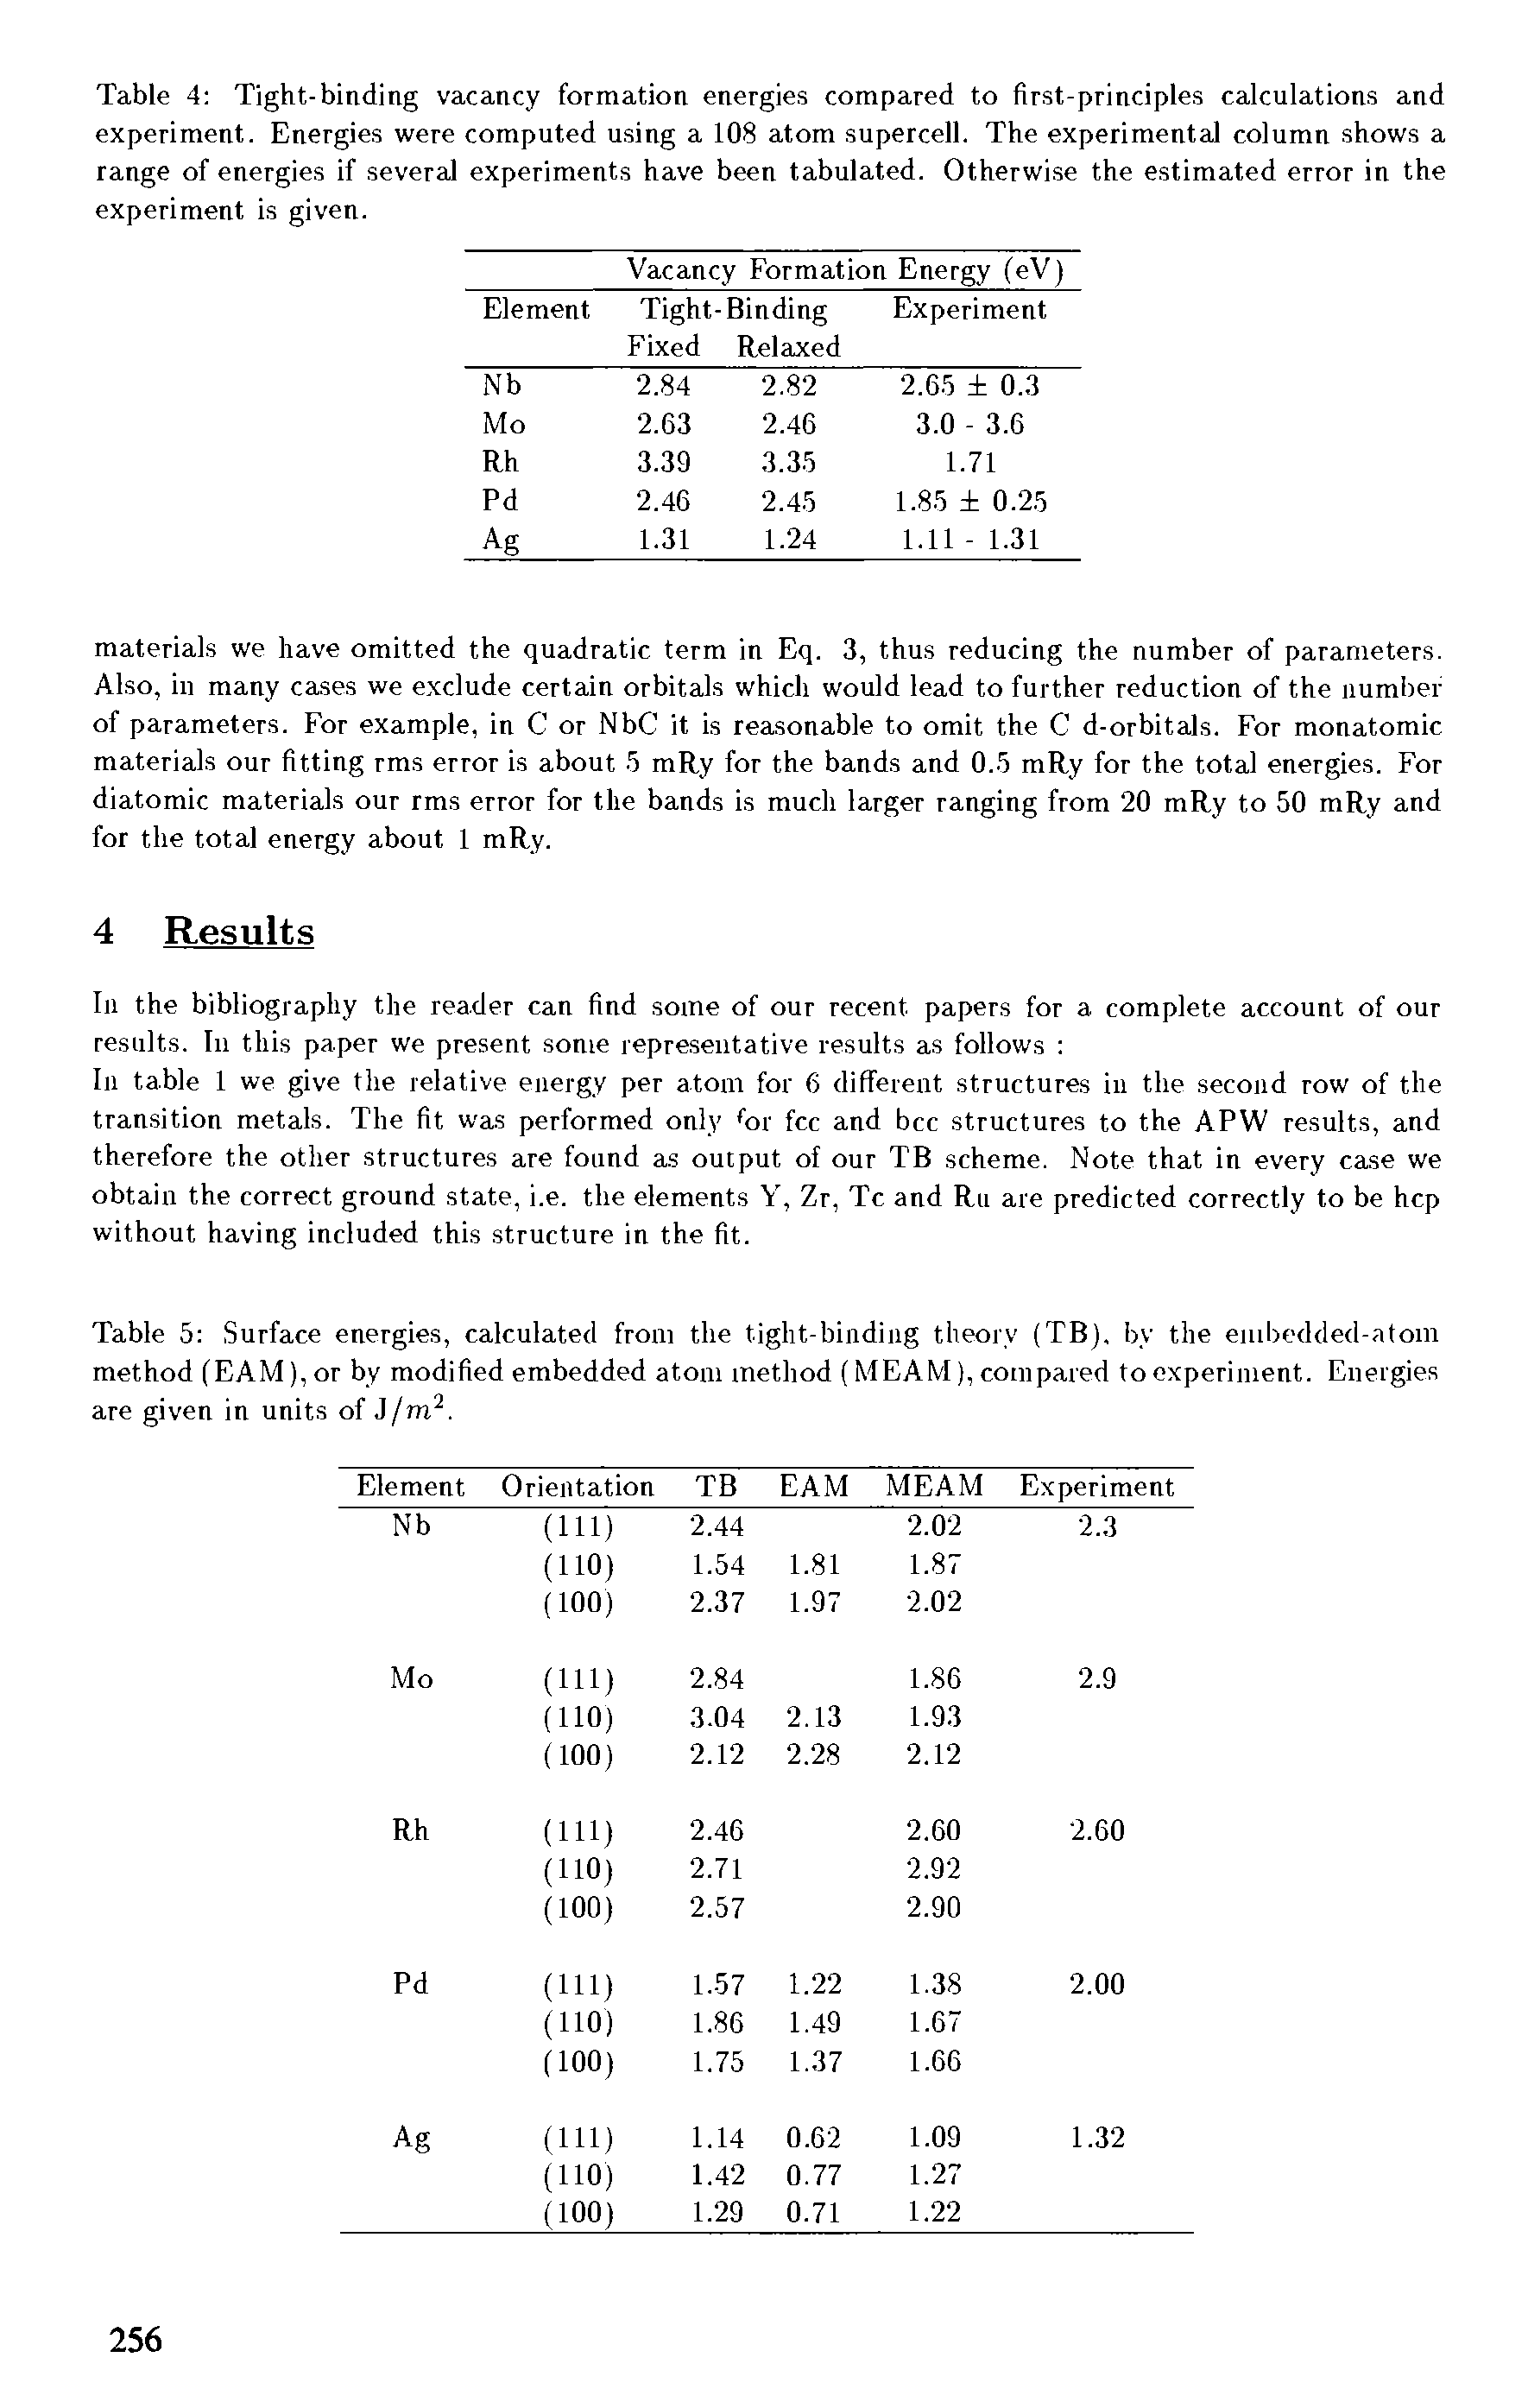 Table 4 Tight-binding vacancy formation energies compared to first-principles calculations and experiment. Energies were computed using a 108 atom supercell. The experimental column shows a range of energies if several experiments have been tabulated. Otherwise the estimated error in the experiment is given.